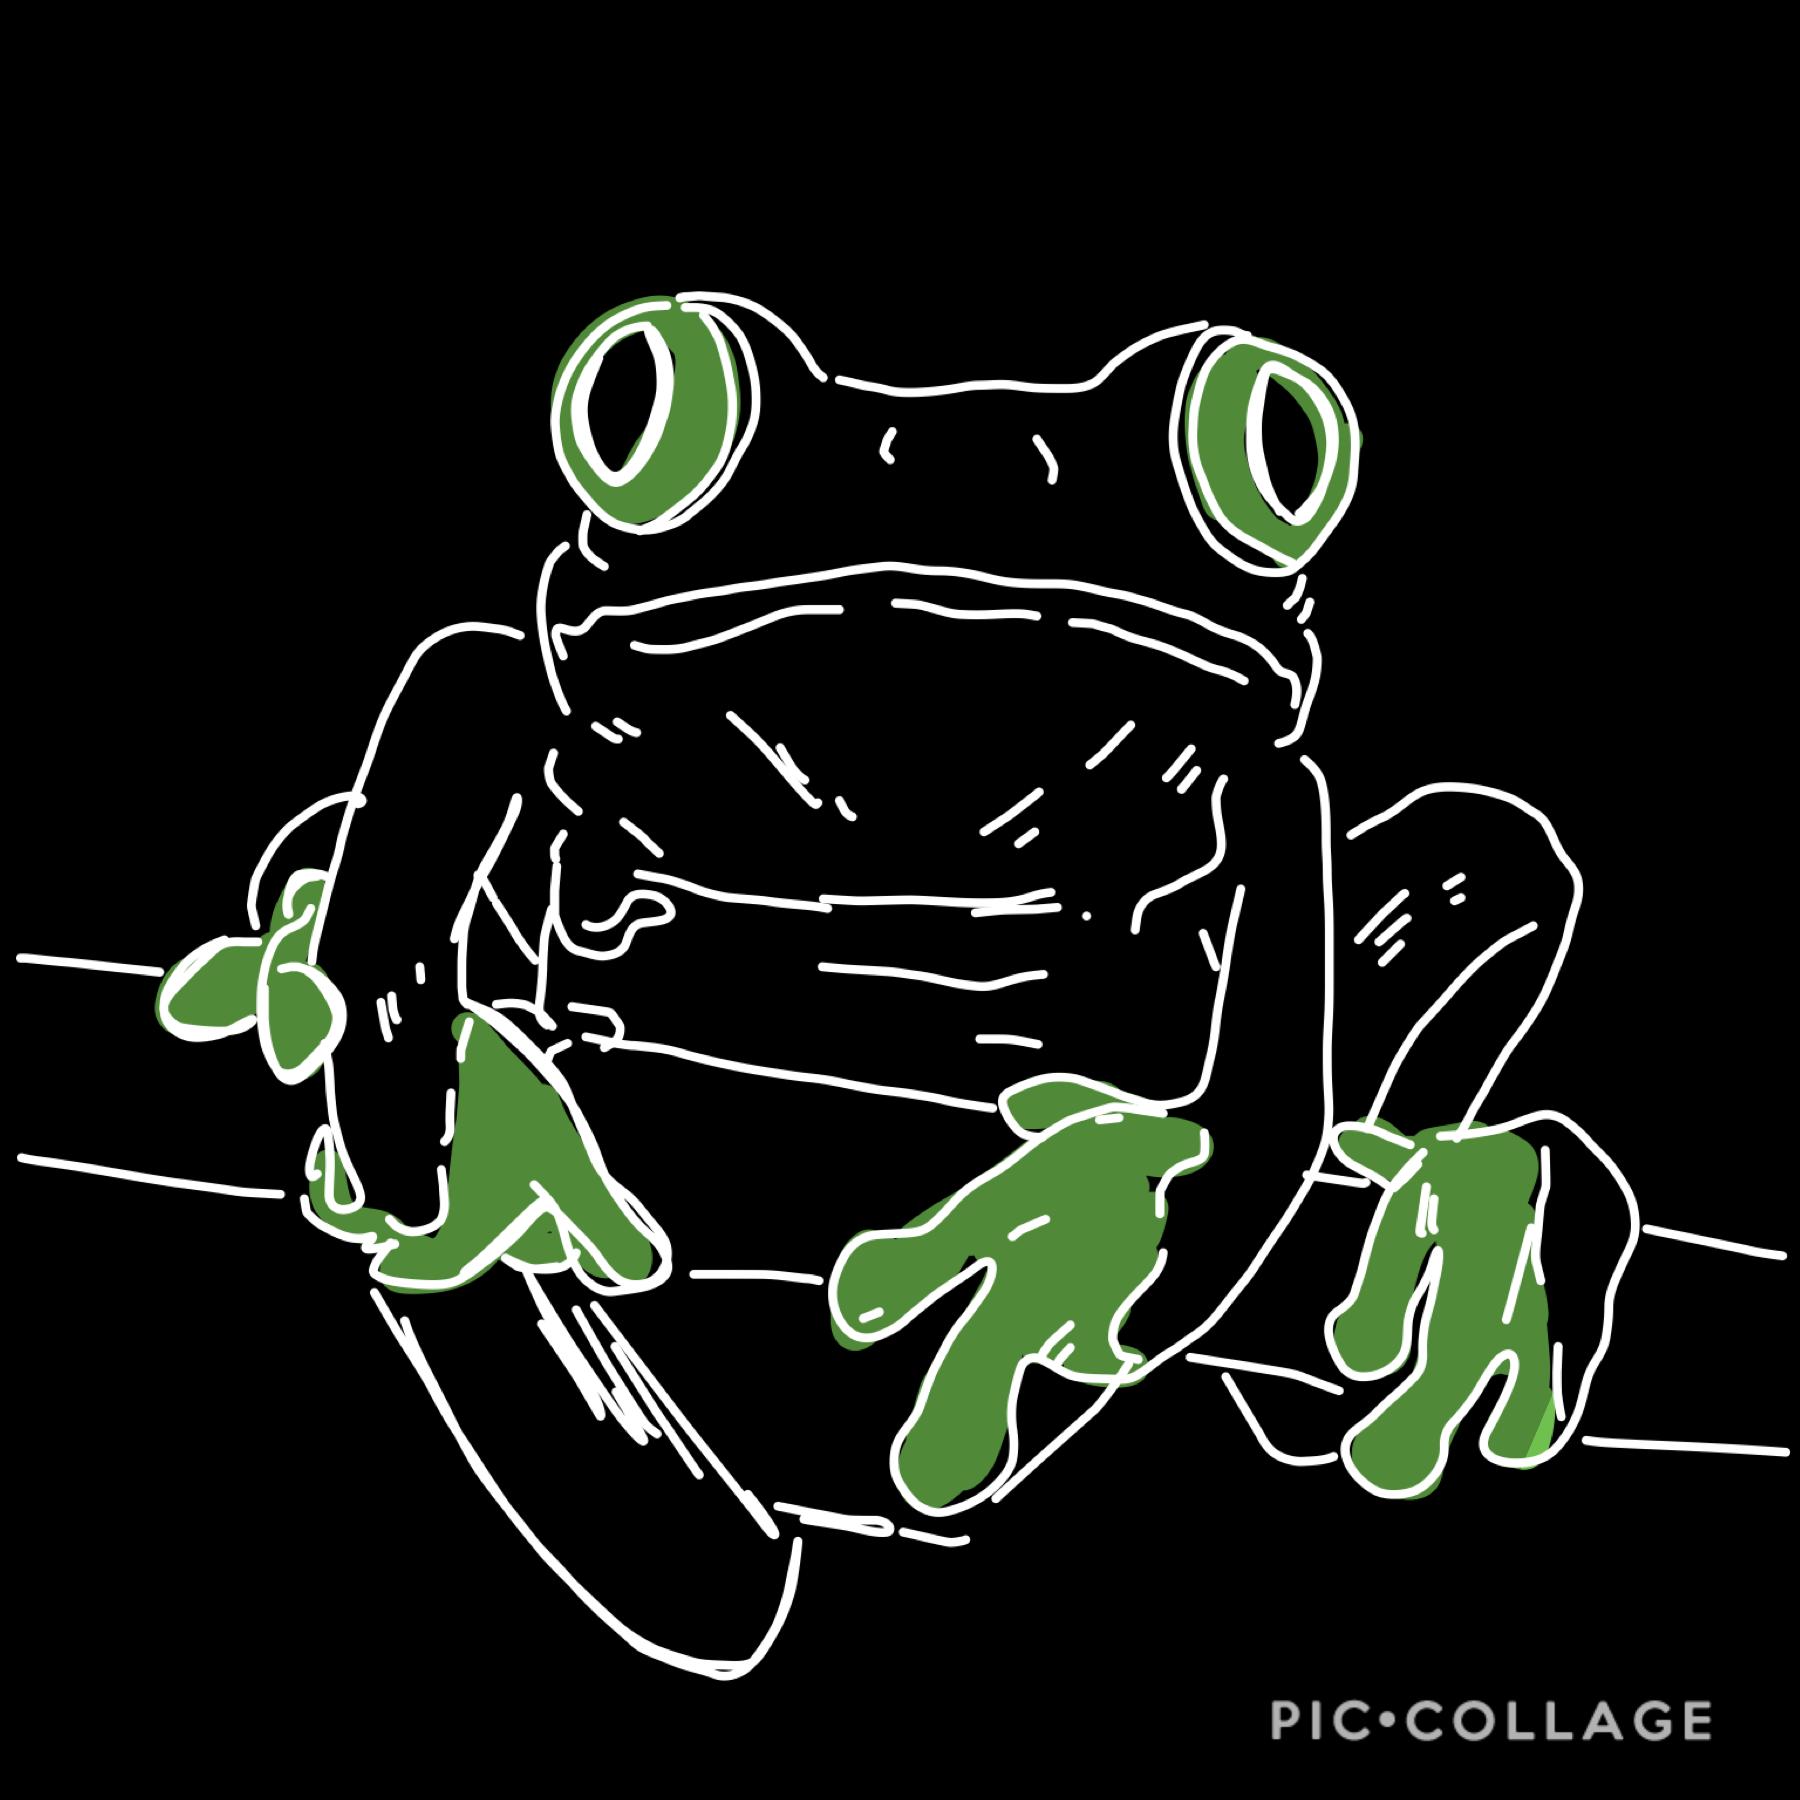 frog!!!!!! - theres a thing in remixes regarding recent post on my main, u dont have to read it